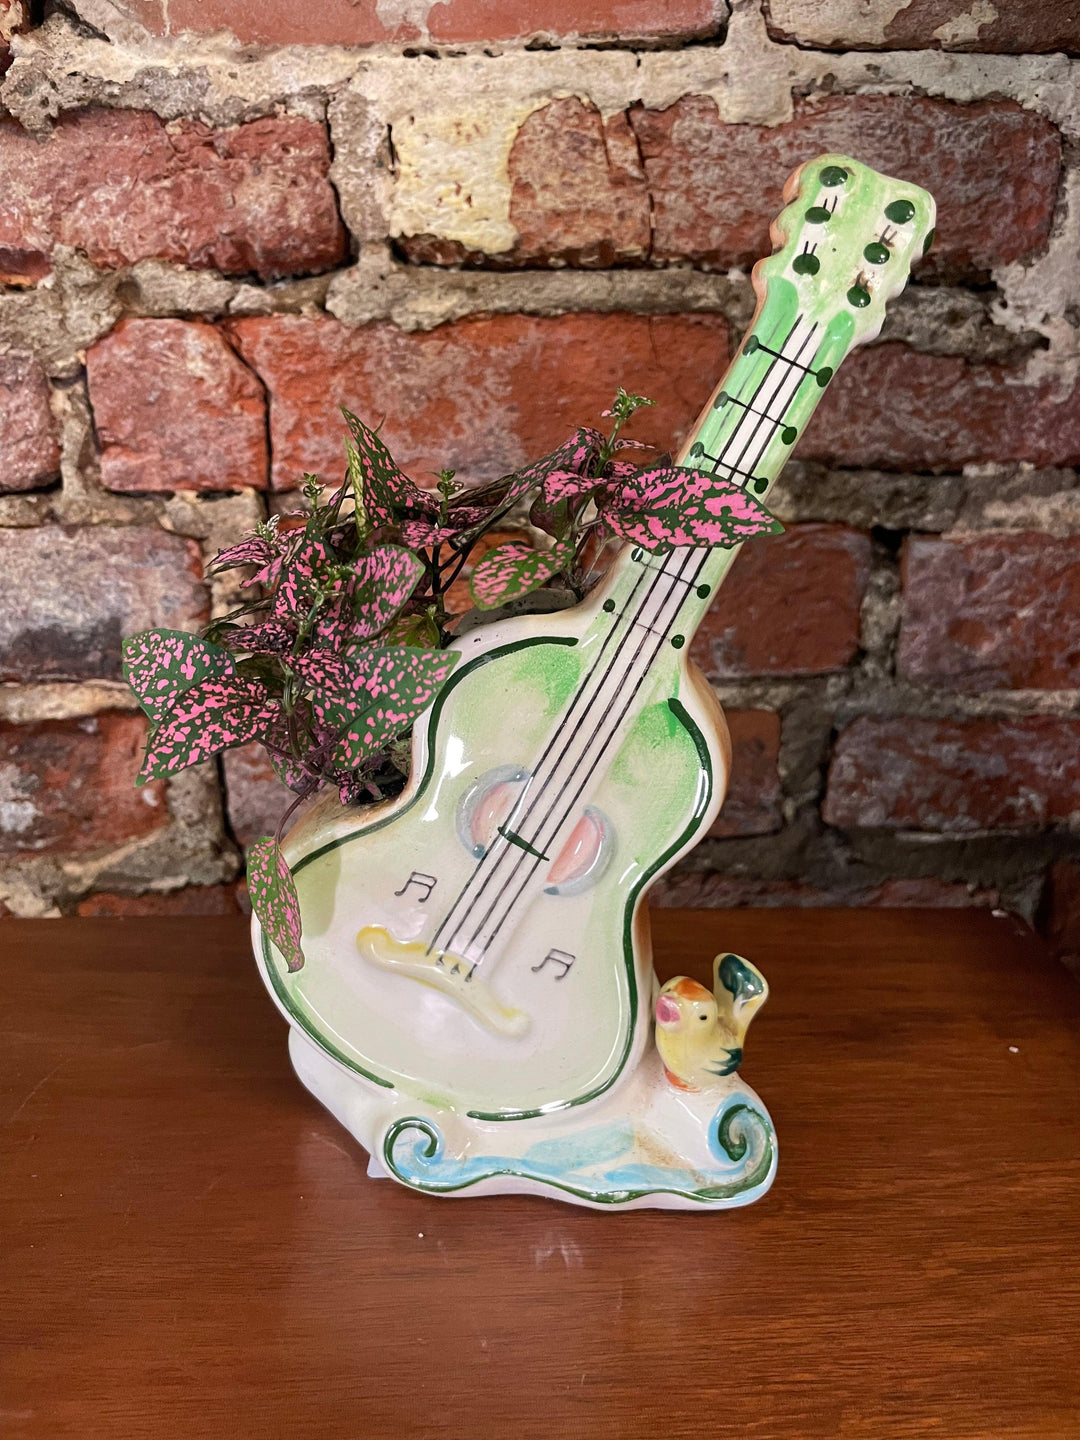 Guitar with Bird Planter with hypoestes plant - Casey & Company